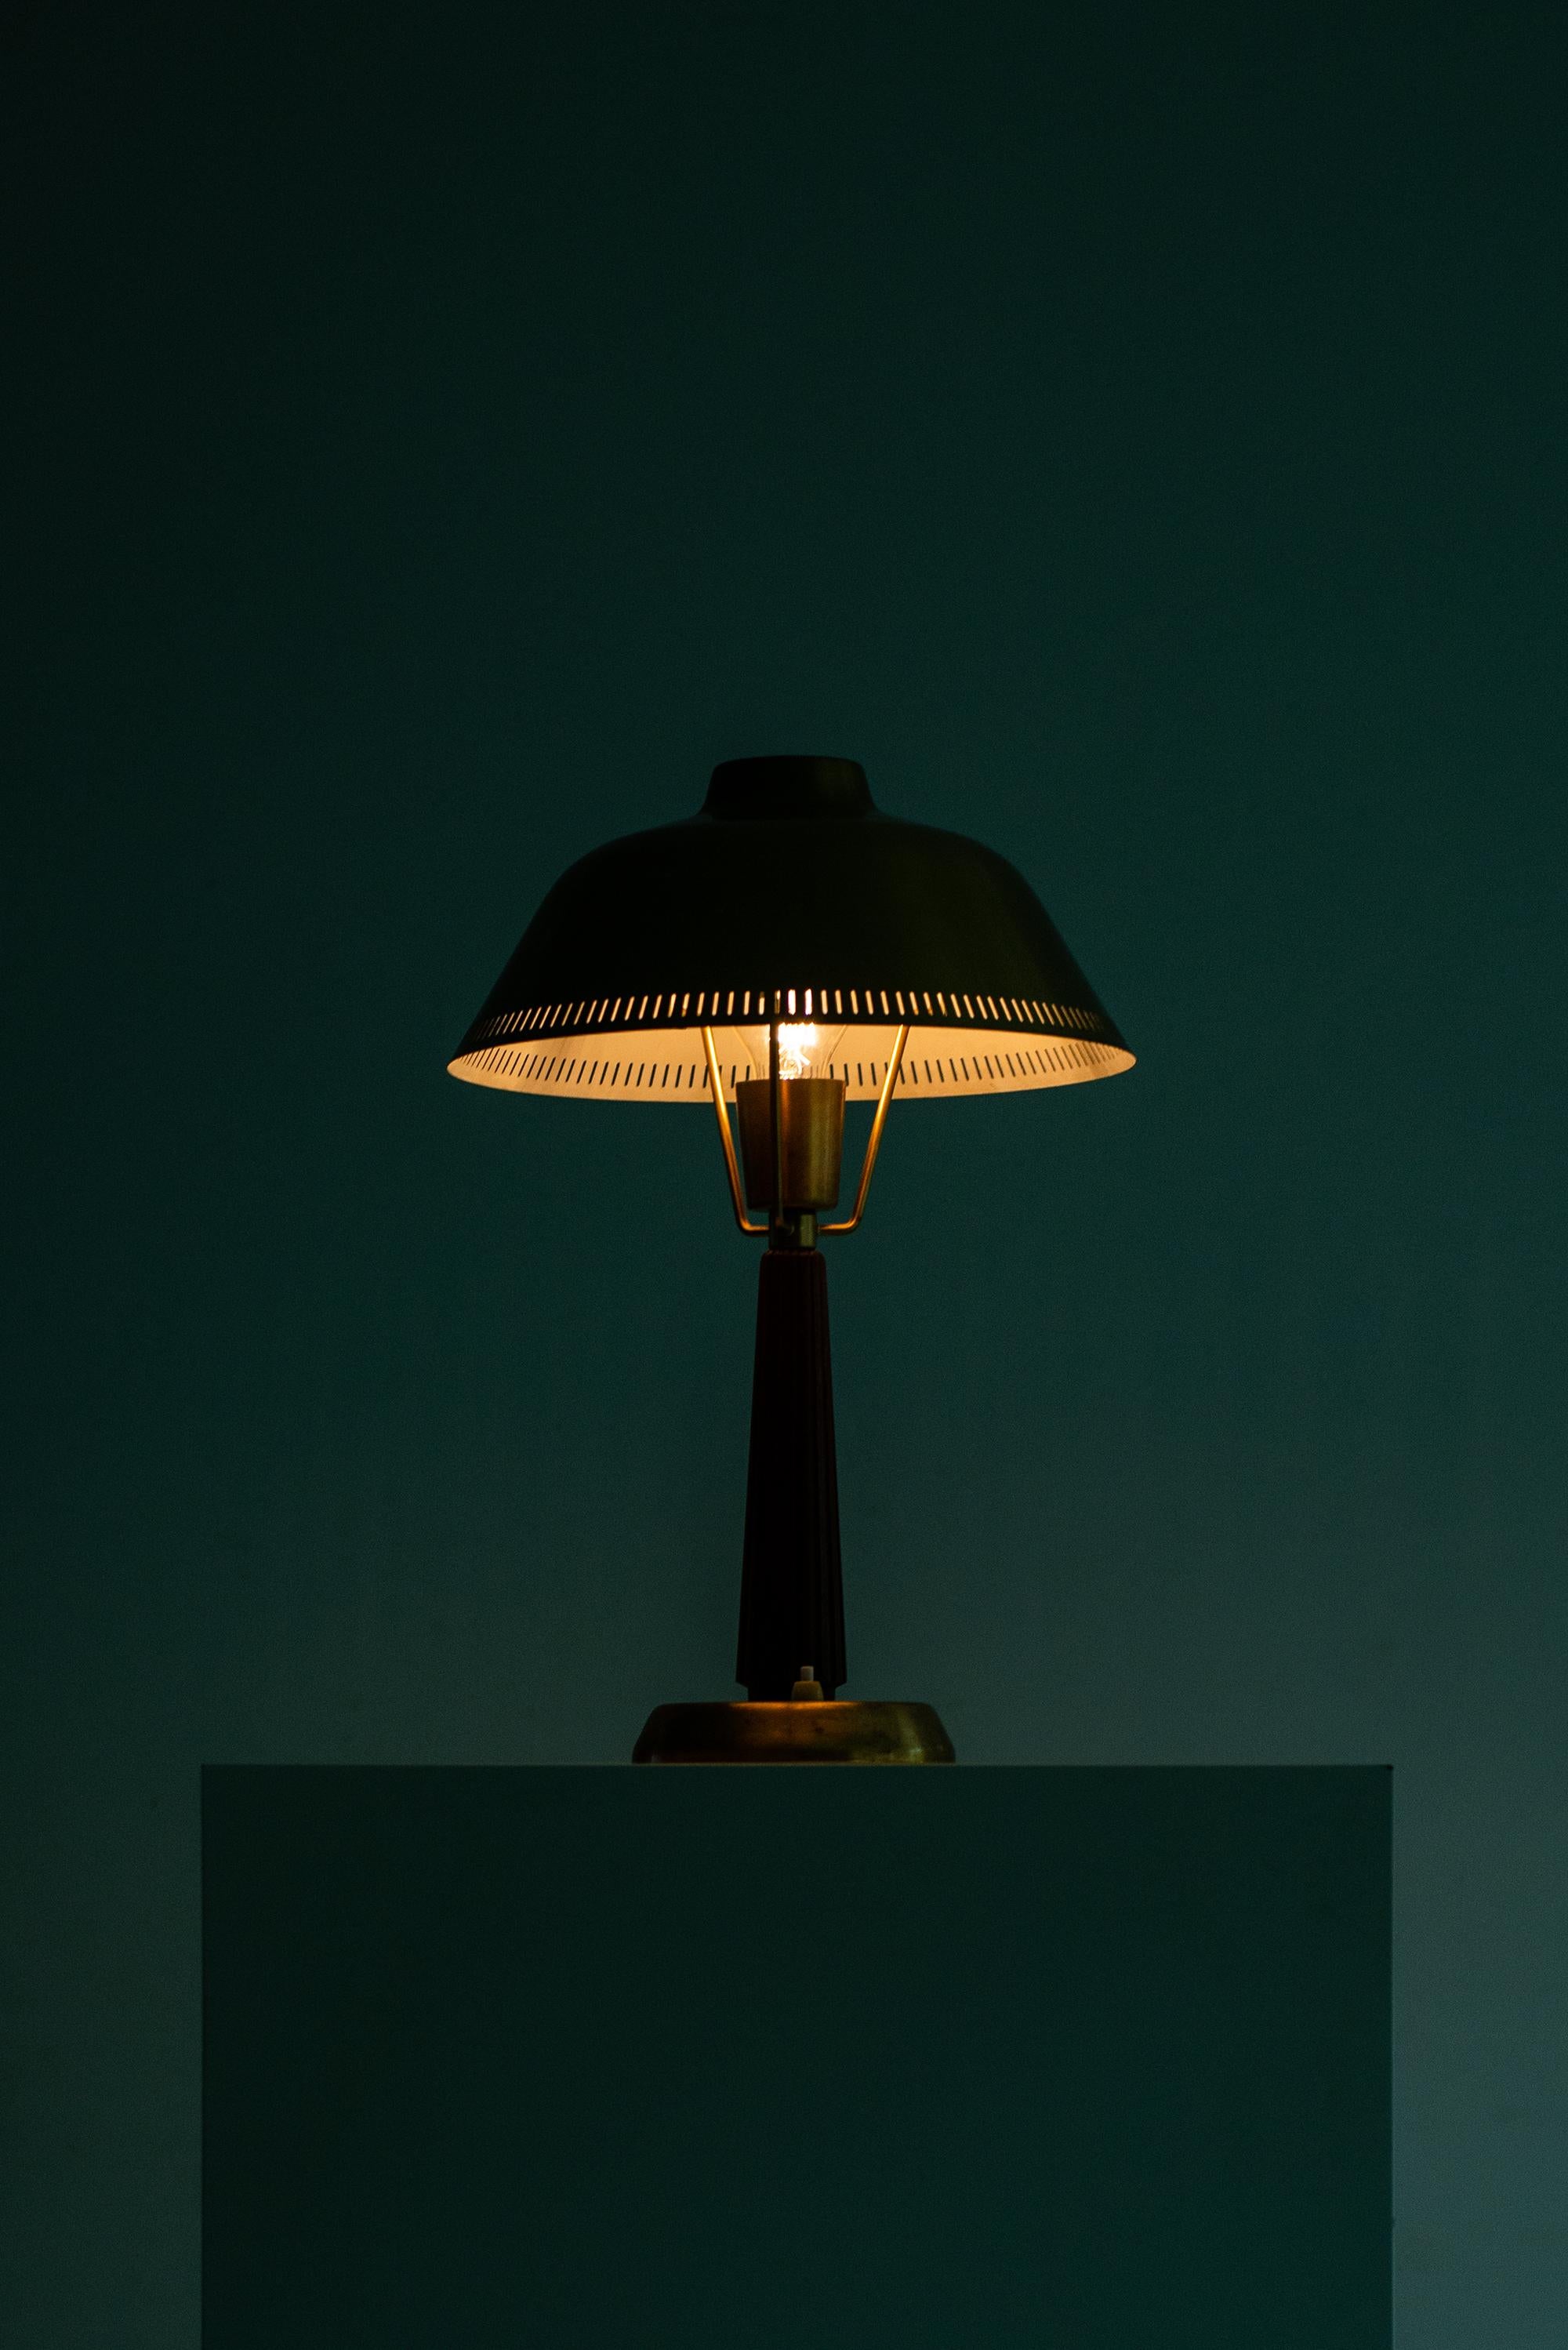 Hans Bergström Table Lamp Produced by ASEA in Sweden In Good Condition For Sale In Limhamn, Skåne län